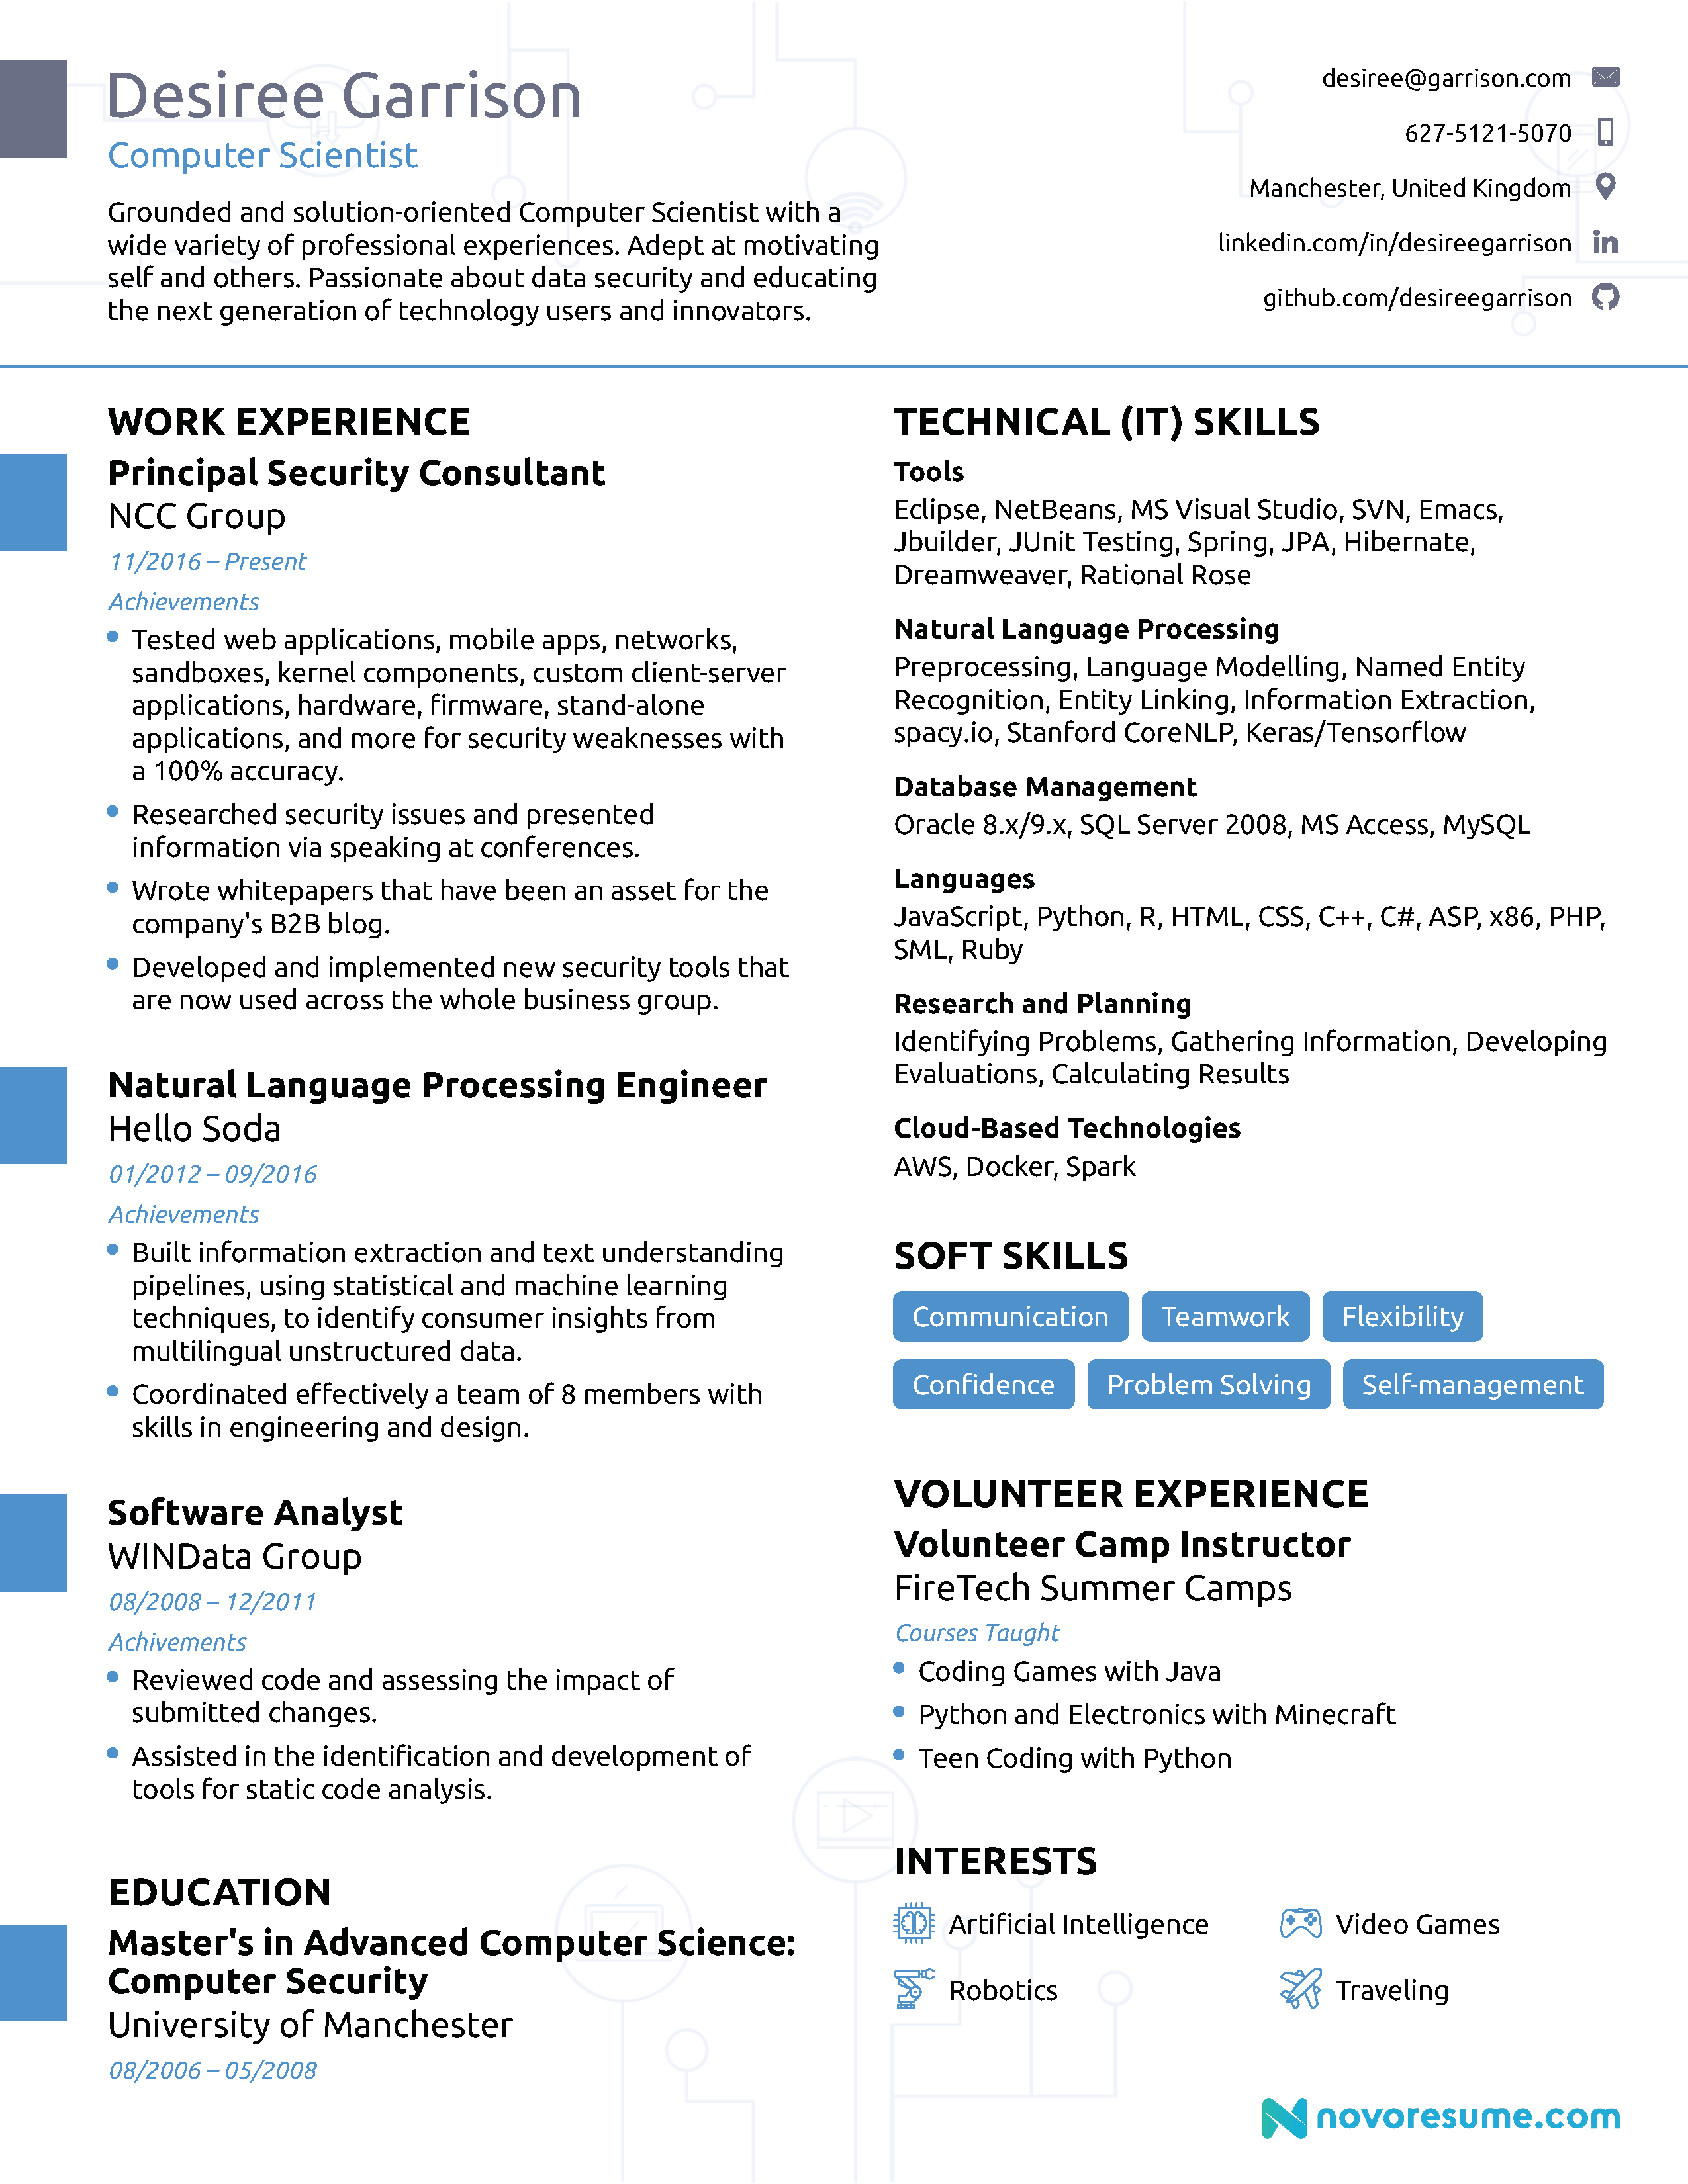 Computer Science Resume [2020]